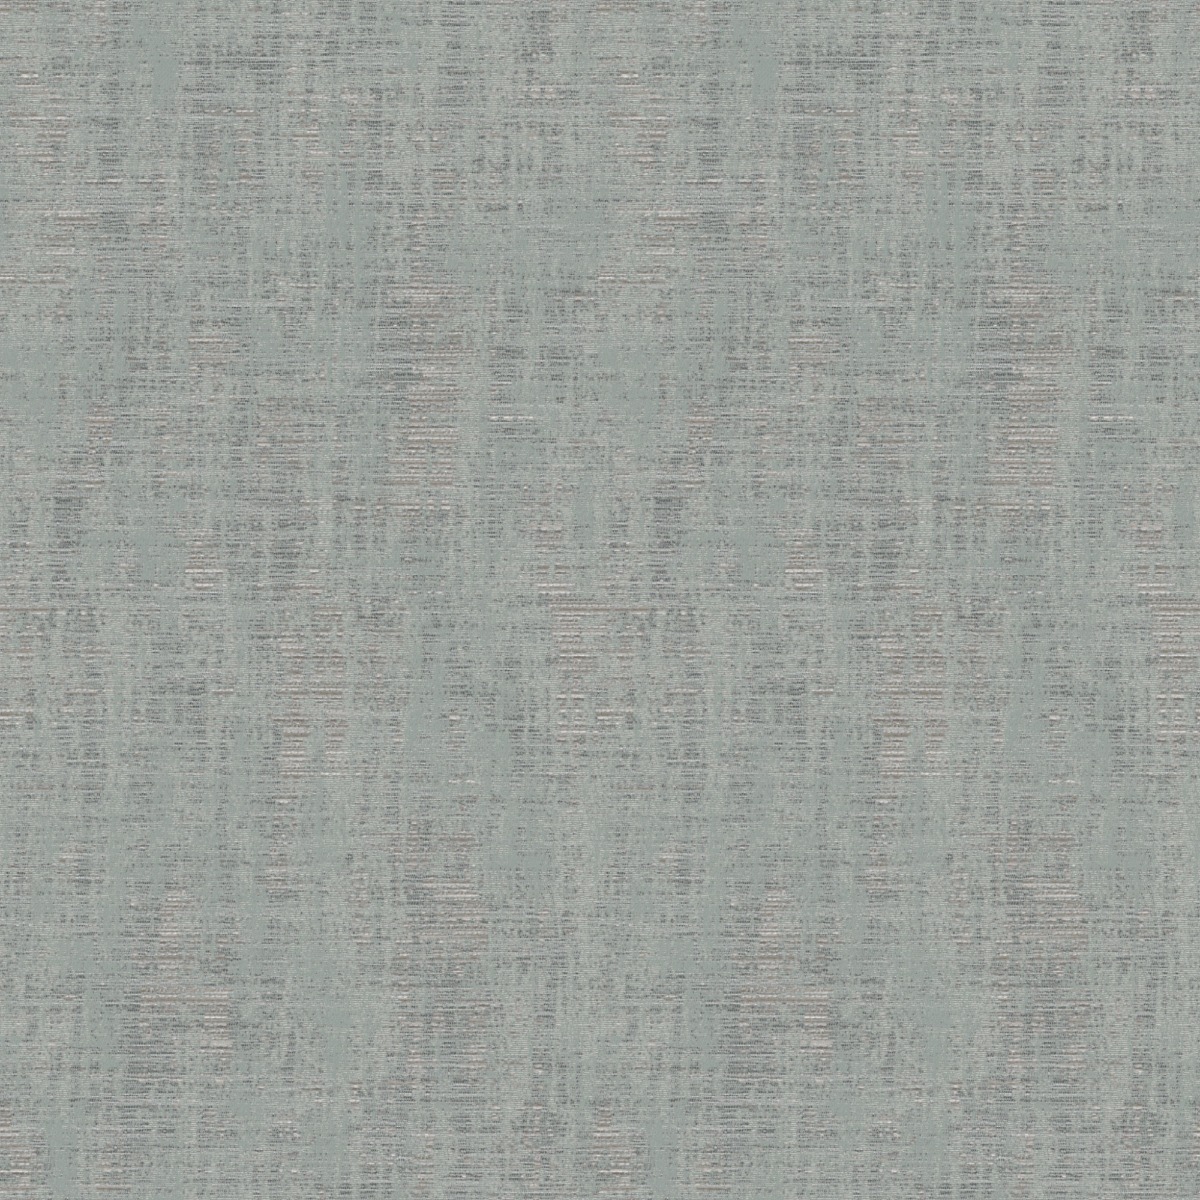 A seamless fabric texture with graphical green texture units arranged in a None pattern